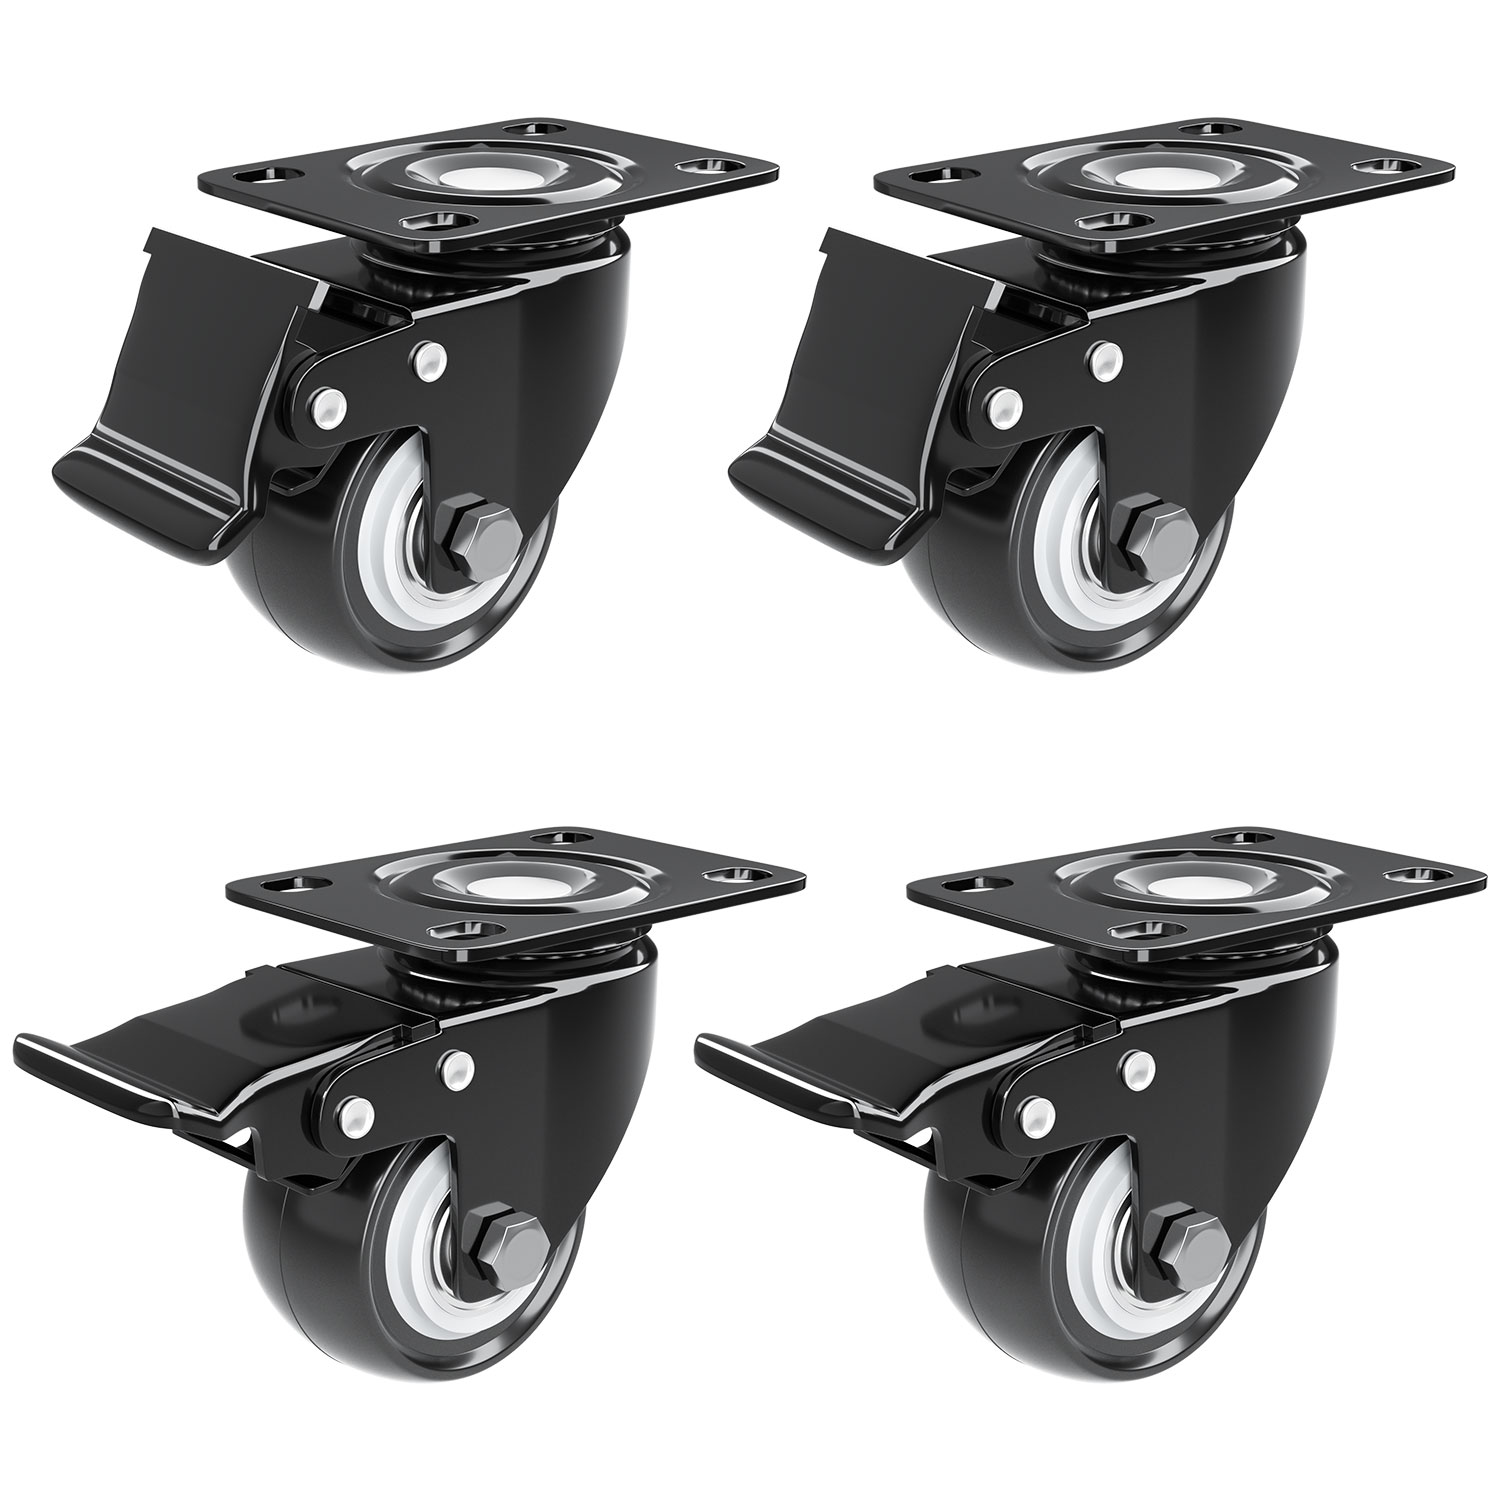 2 inch Caster Wheel with Brake Locking and NO Noise Rubber Wheels, Heavy Duty Swivel Plate Caster for DIY Cart Dolly, Support 600 lbs, 4 Pack